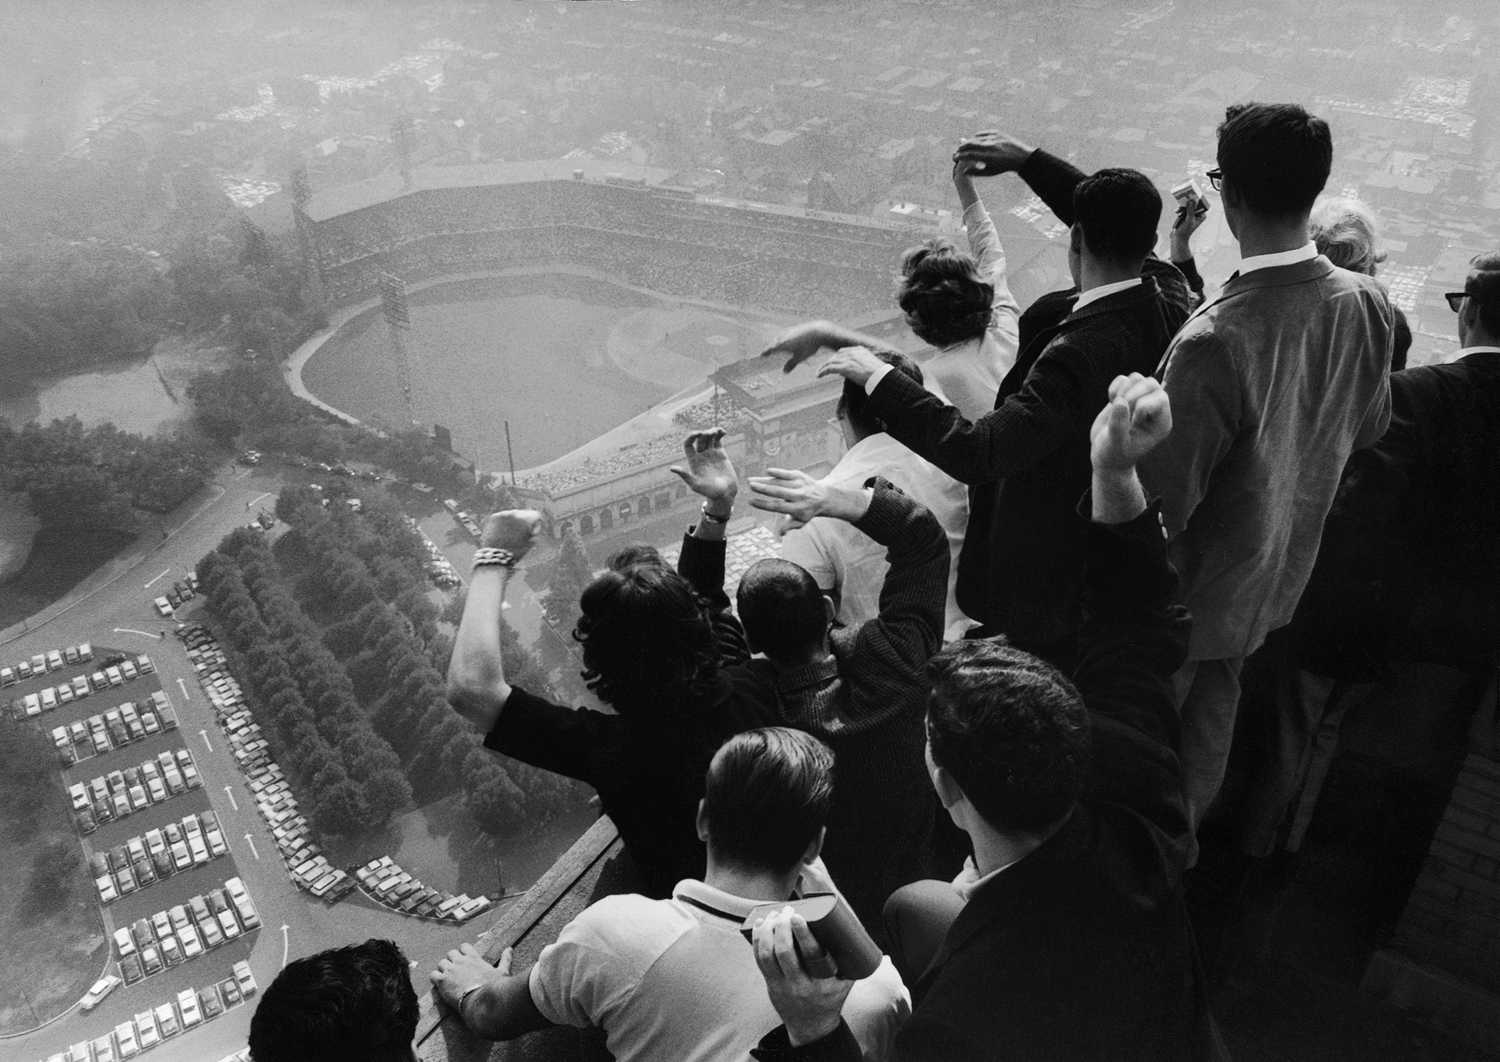 University of Pittsburgh students cheer wildly from atop the Cathedral of Learning as they look down on Forbes Field, where the Pittsburgh Pirates are playing the Yankees in the 7th game of a Series that would enter baseball lore when Bill Mazeroski smacked a 9th-inning, game-winning home run.